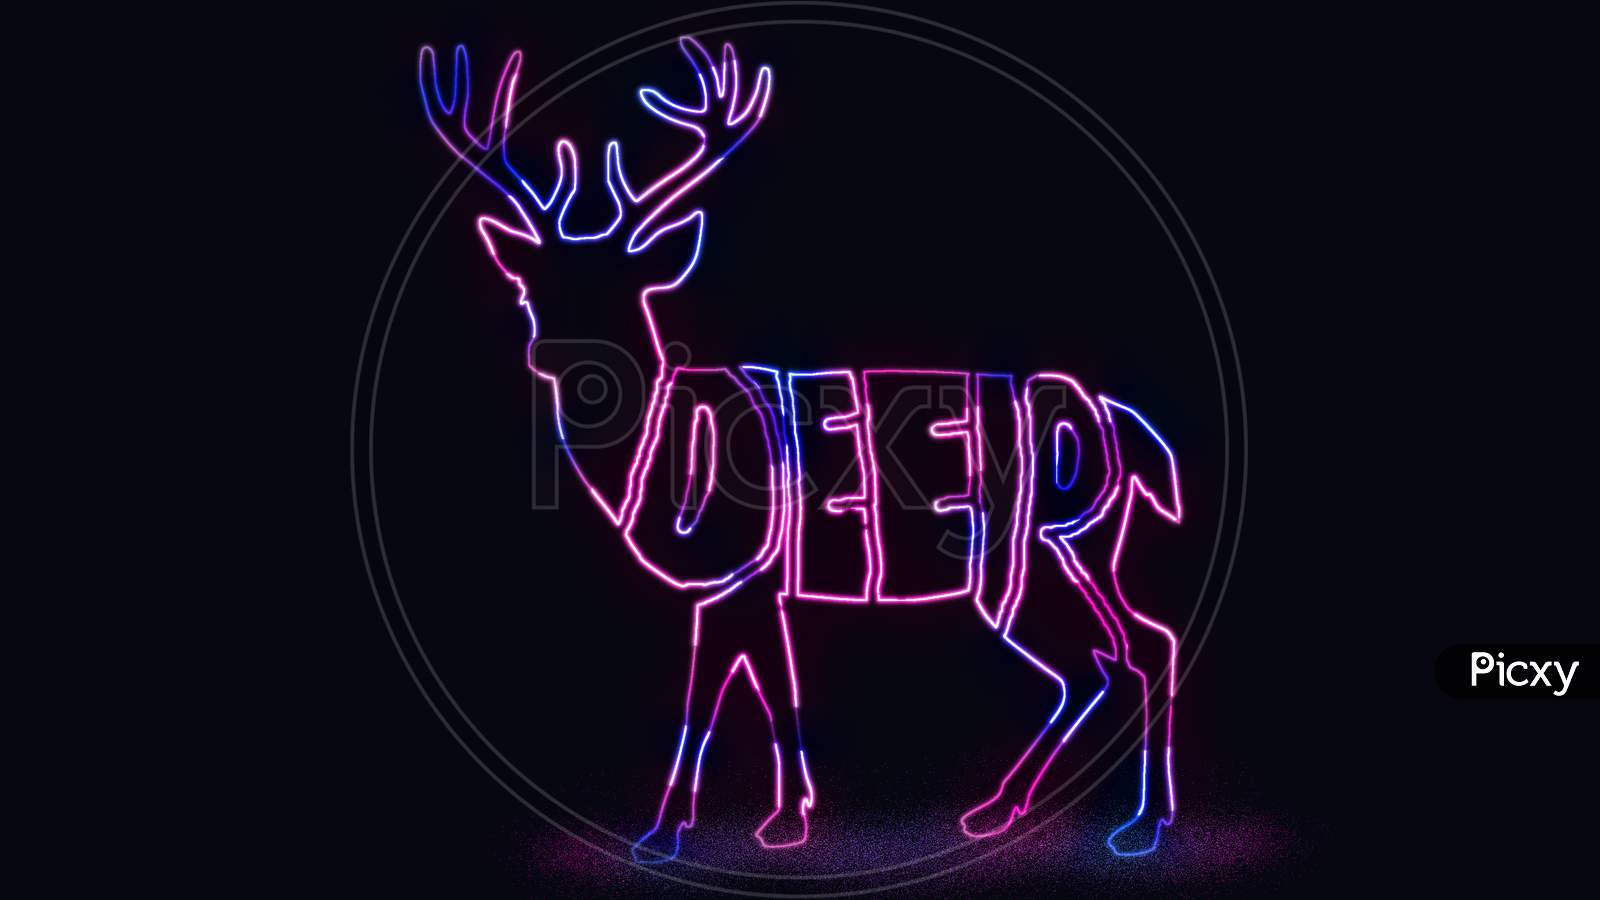 The Text Deer Written In The Shape Of Deer With Neon Light Effect. Animal Text Outline With Neon Light Effect.